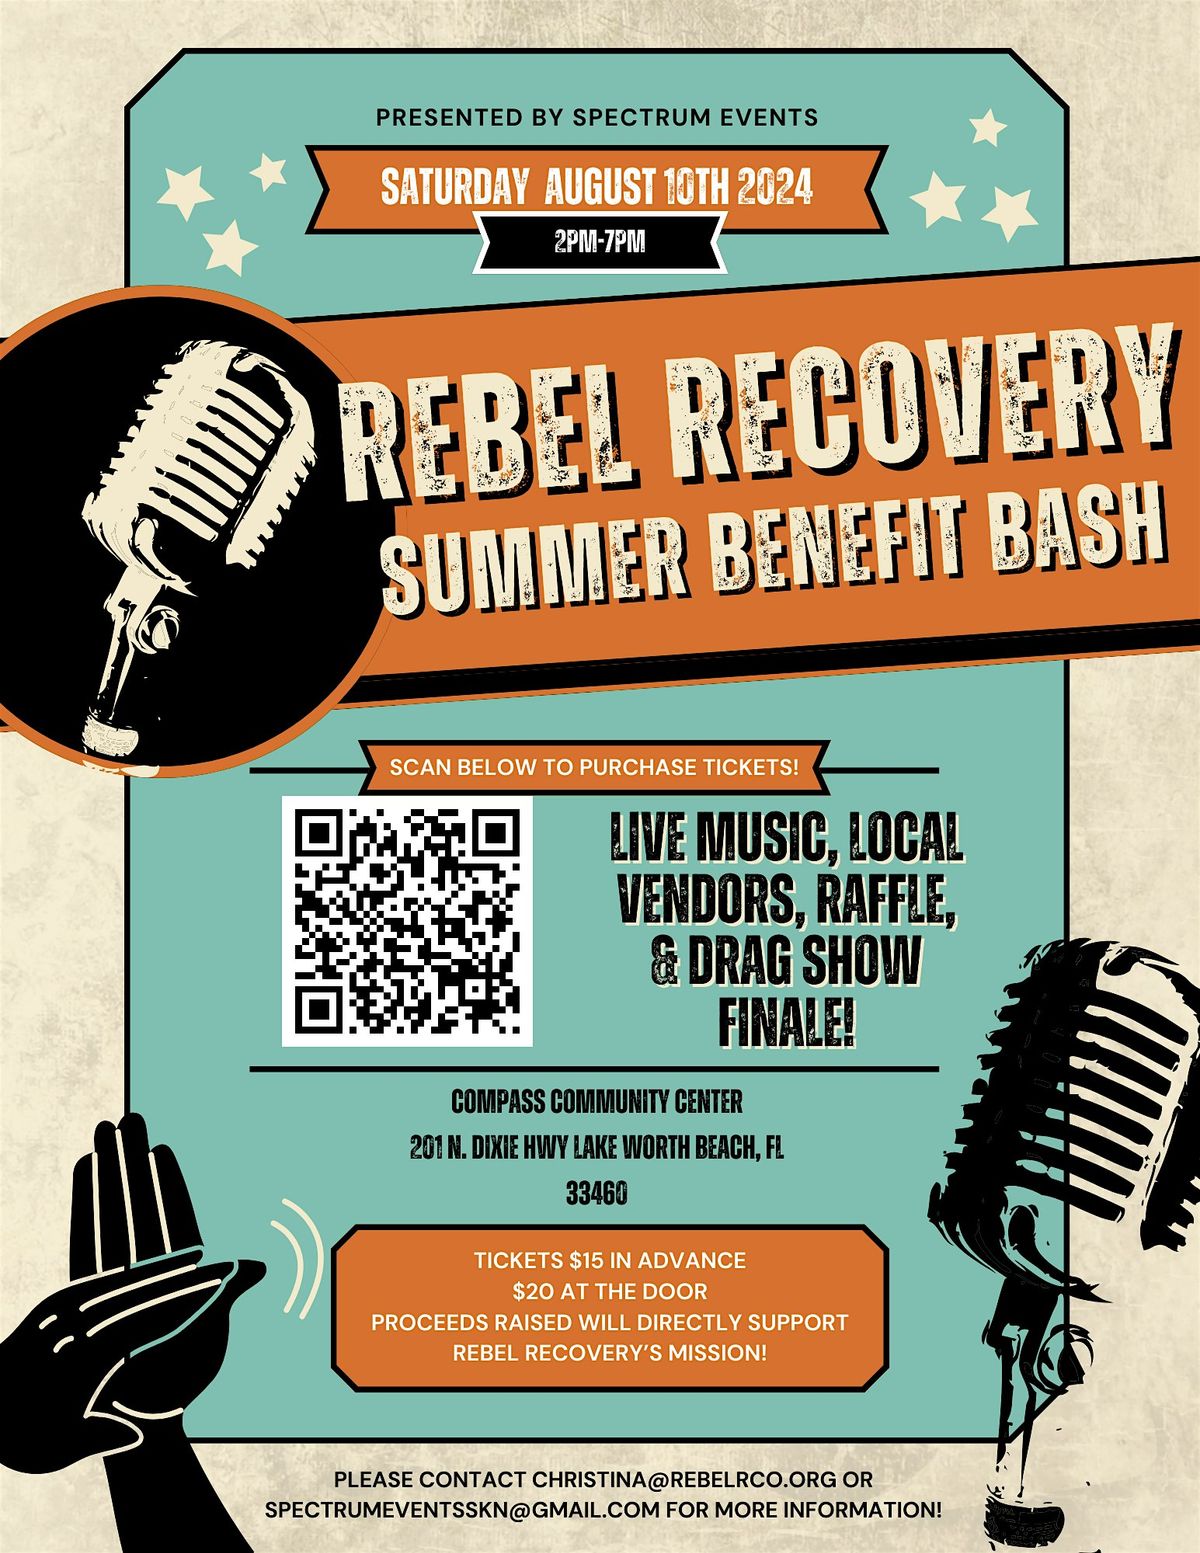 Rebel Recovery Summer Benefit Bash